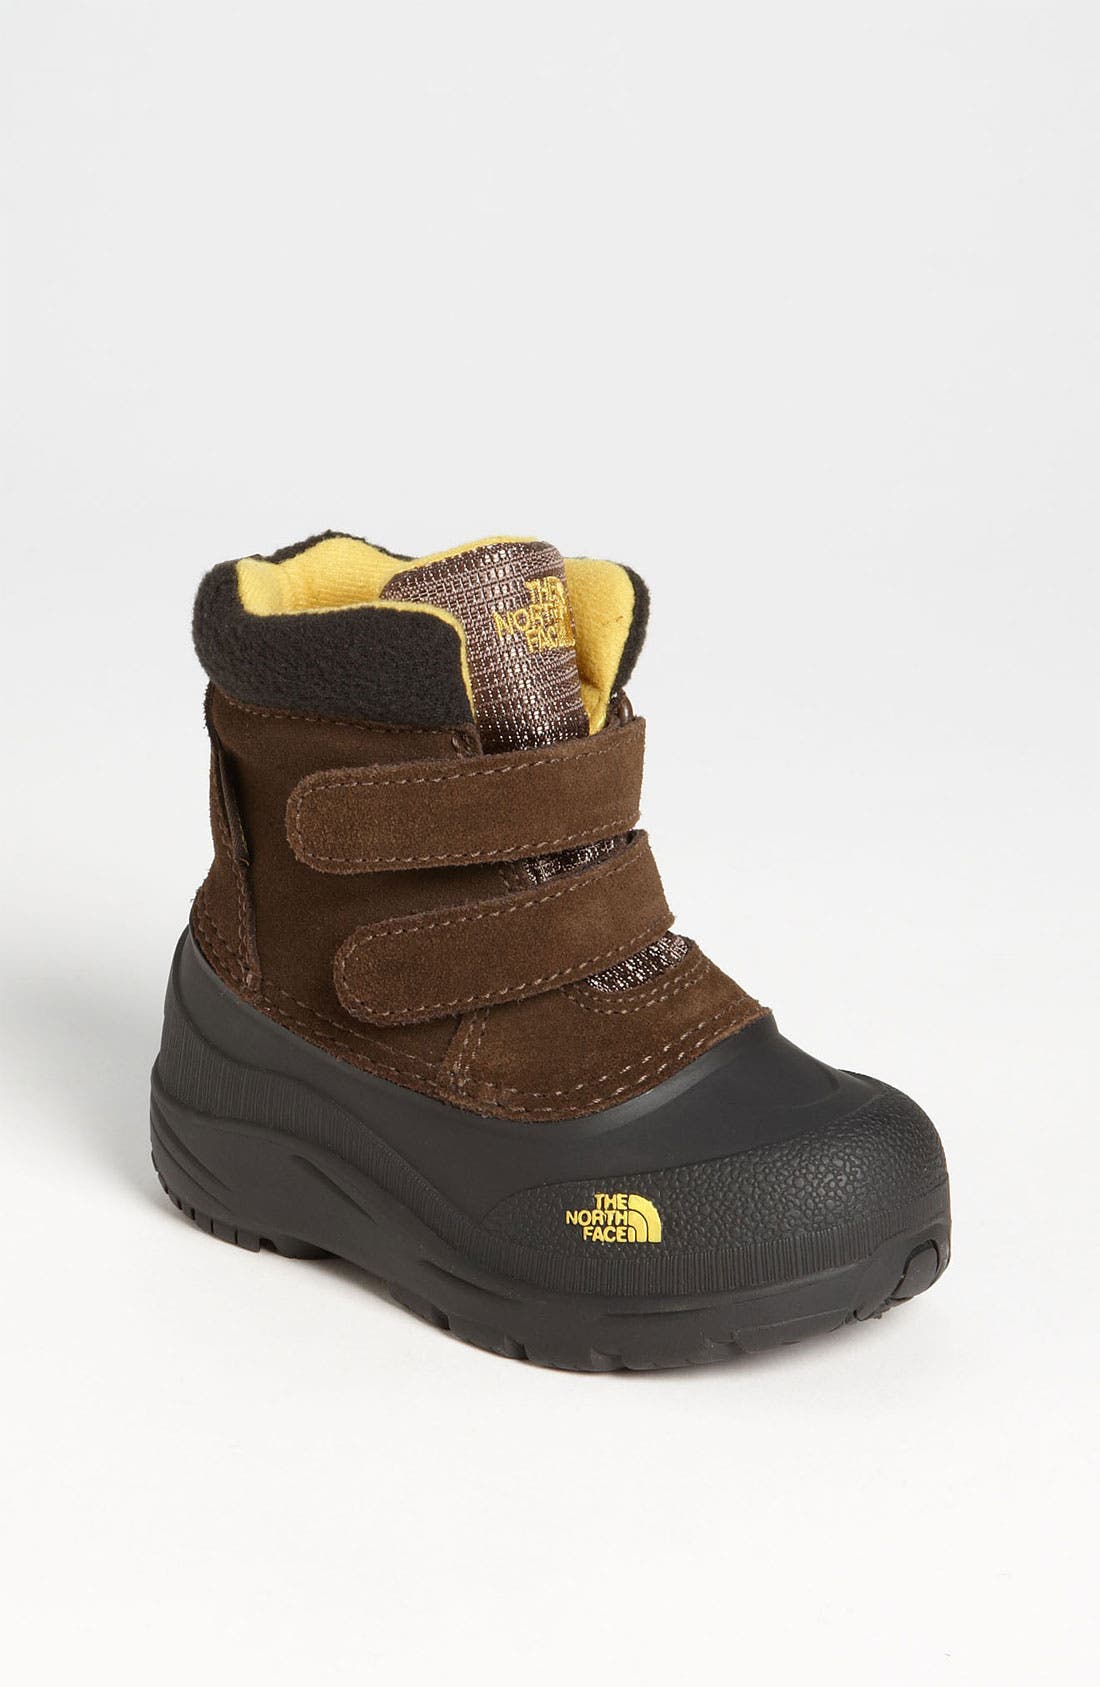 The North Face 'Chilkat' Boots (Walker 